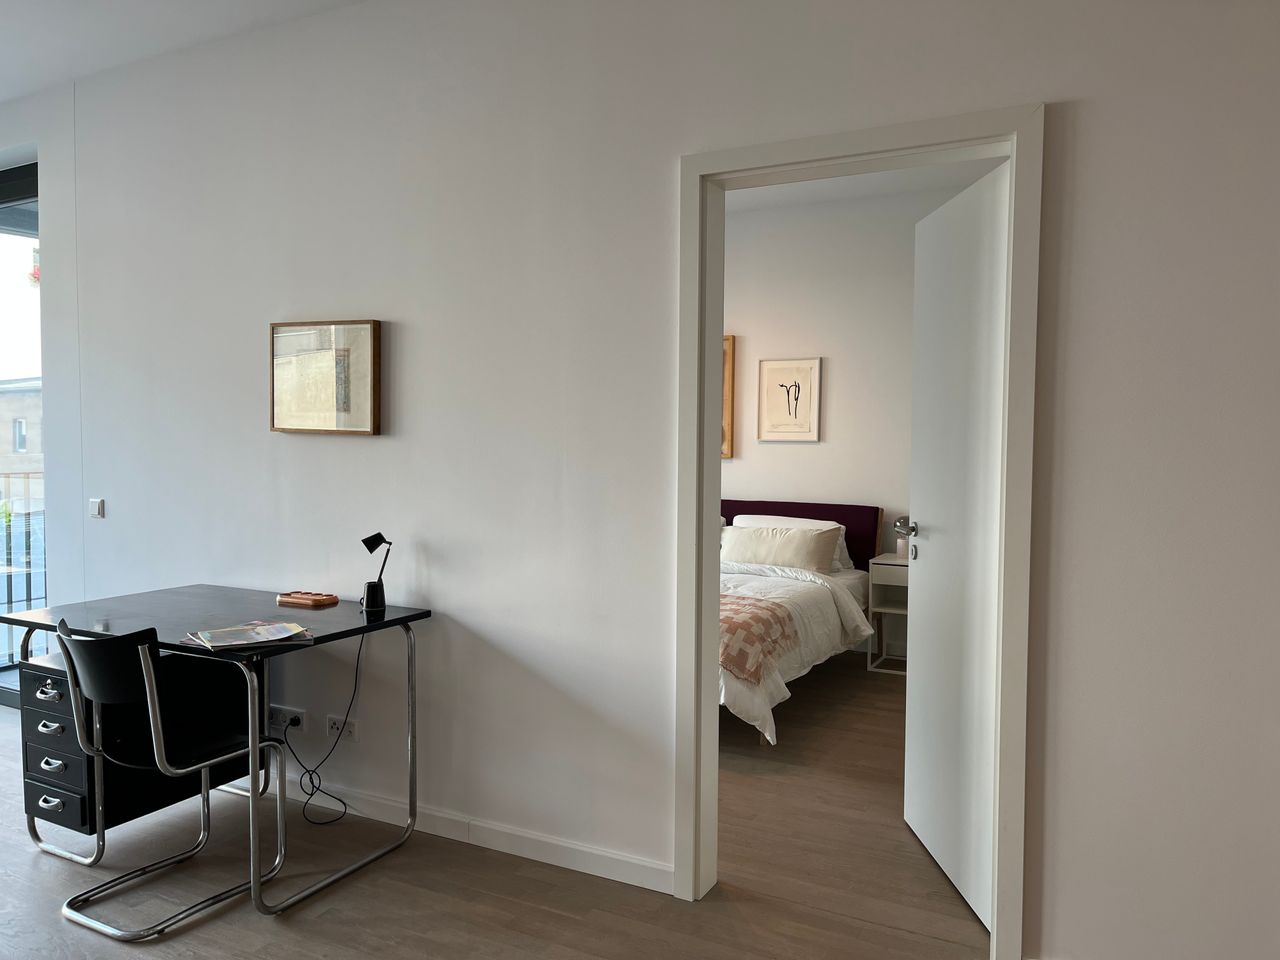 62 m² | 2 -rooms in Mitte - Wedding, near Virchow Clinic